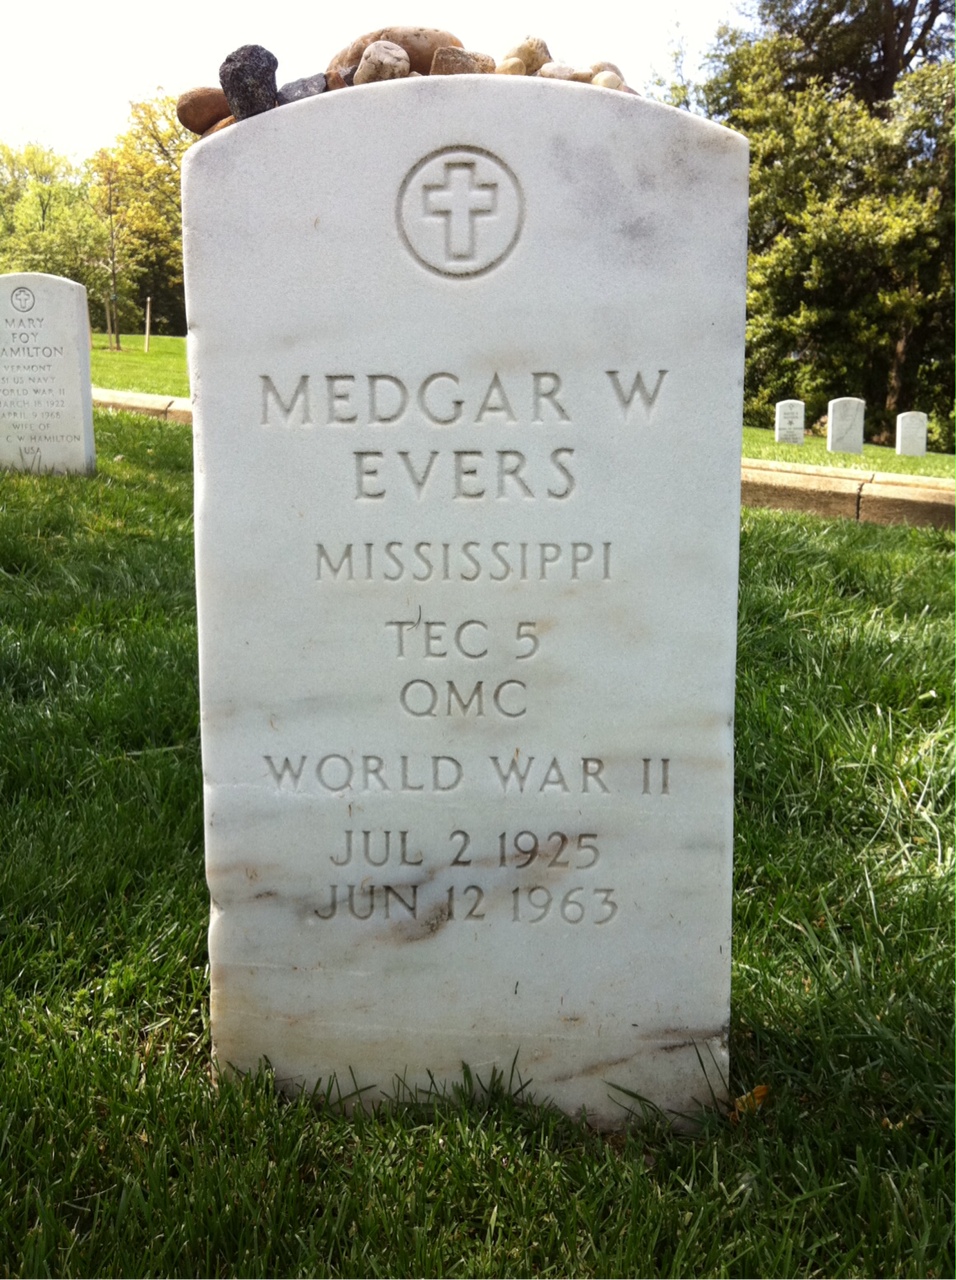 Medgar Evers burial marker at Arlington National Cemetery. White stone with name engraved. (U.S. Army)